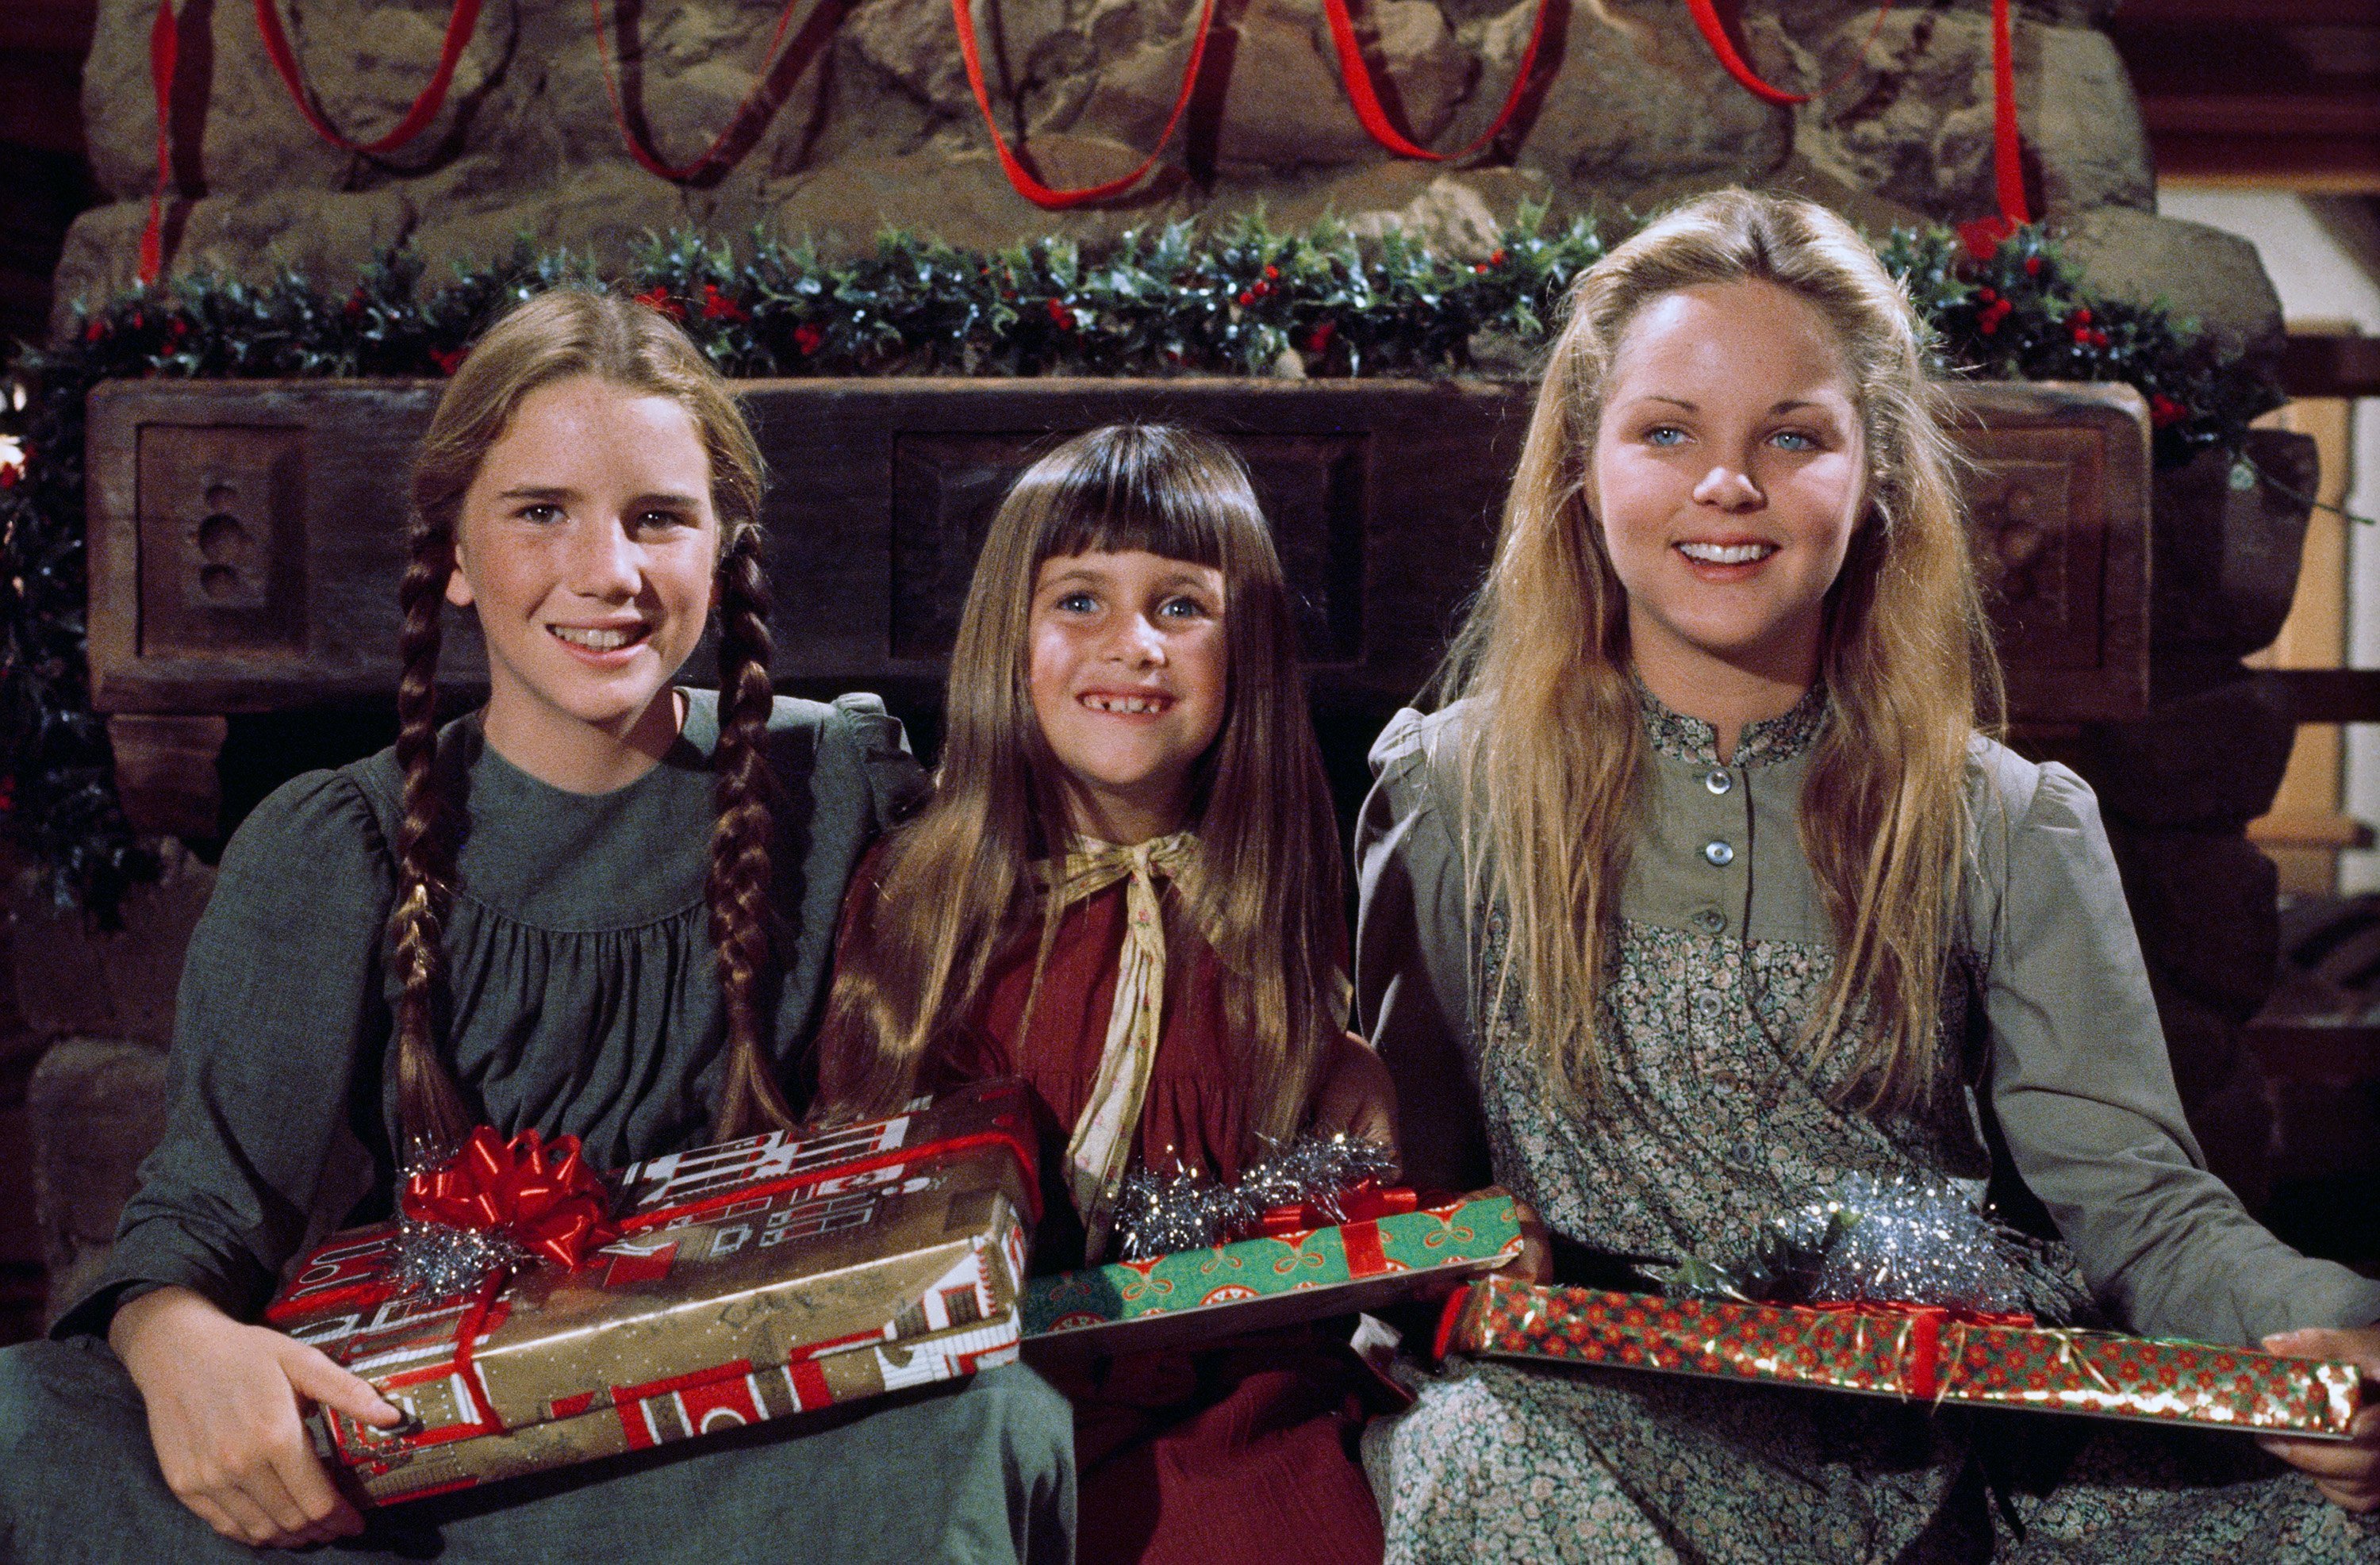 (L-R): Melissa Gilbert, Lindsay or Sydney Greenbush, and Melissa Sue Anderson of 'Little House on the Prairie'